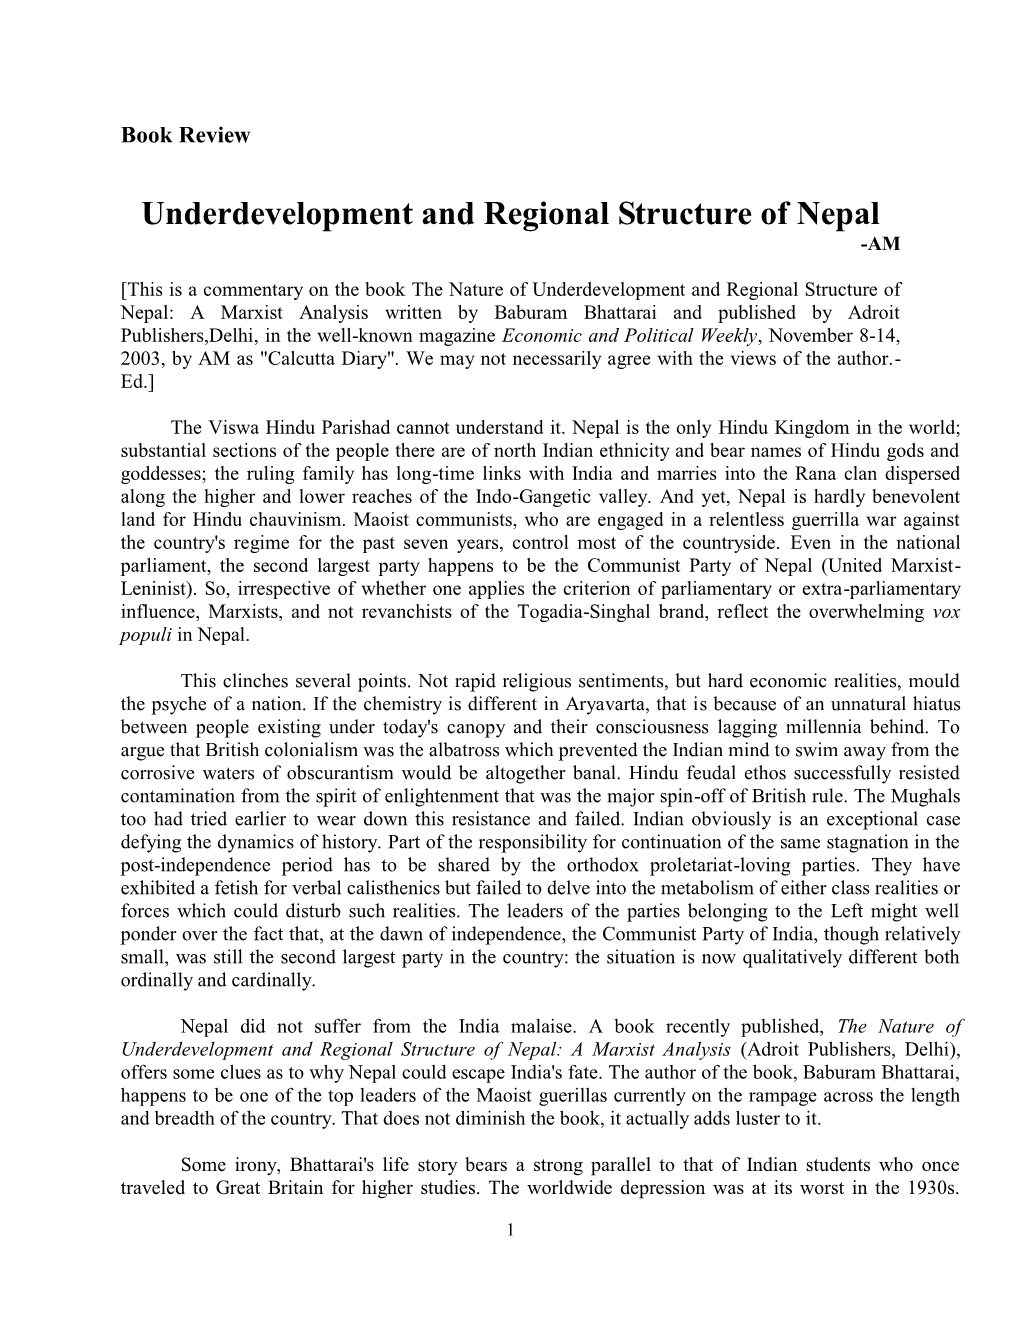 Underdevelopment and Regional Structure of Nepal -AM